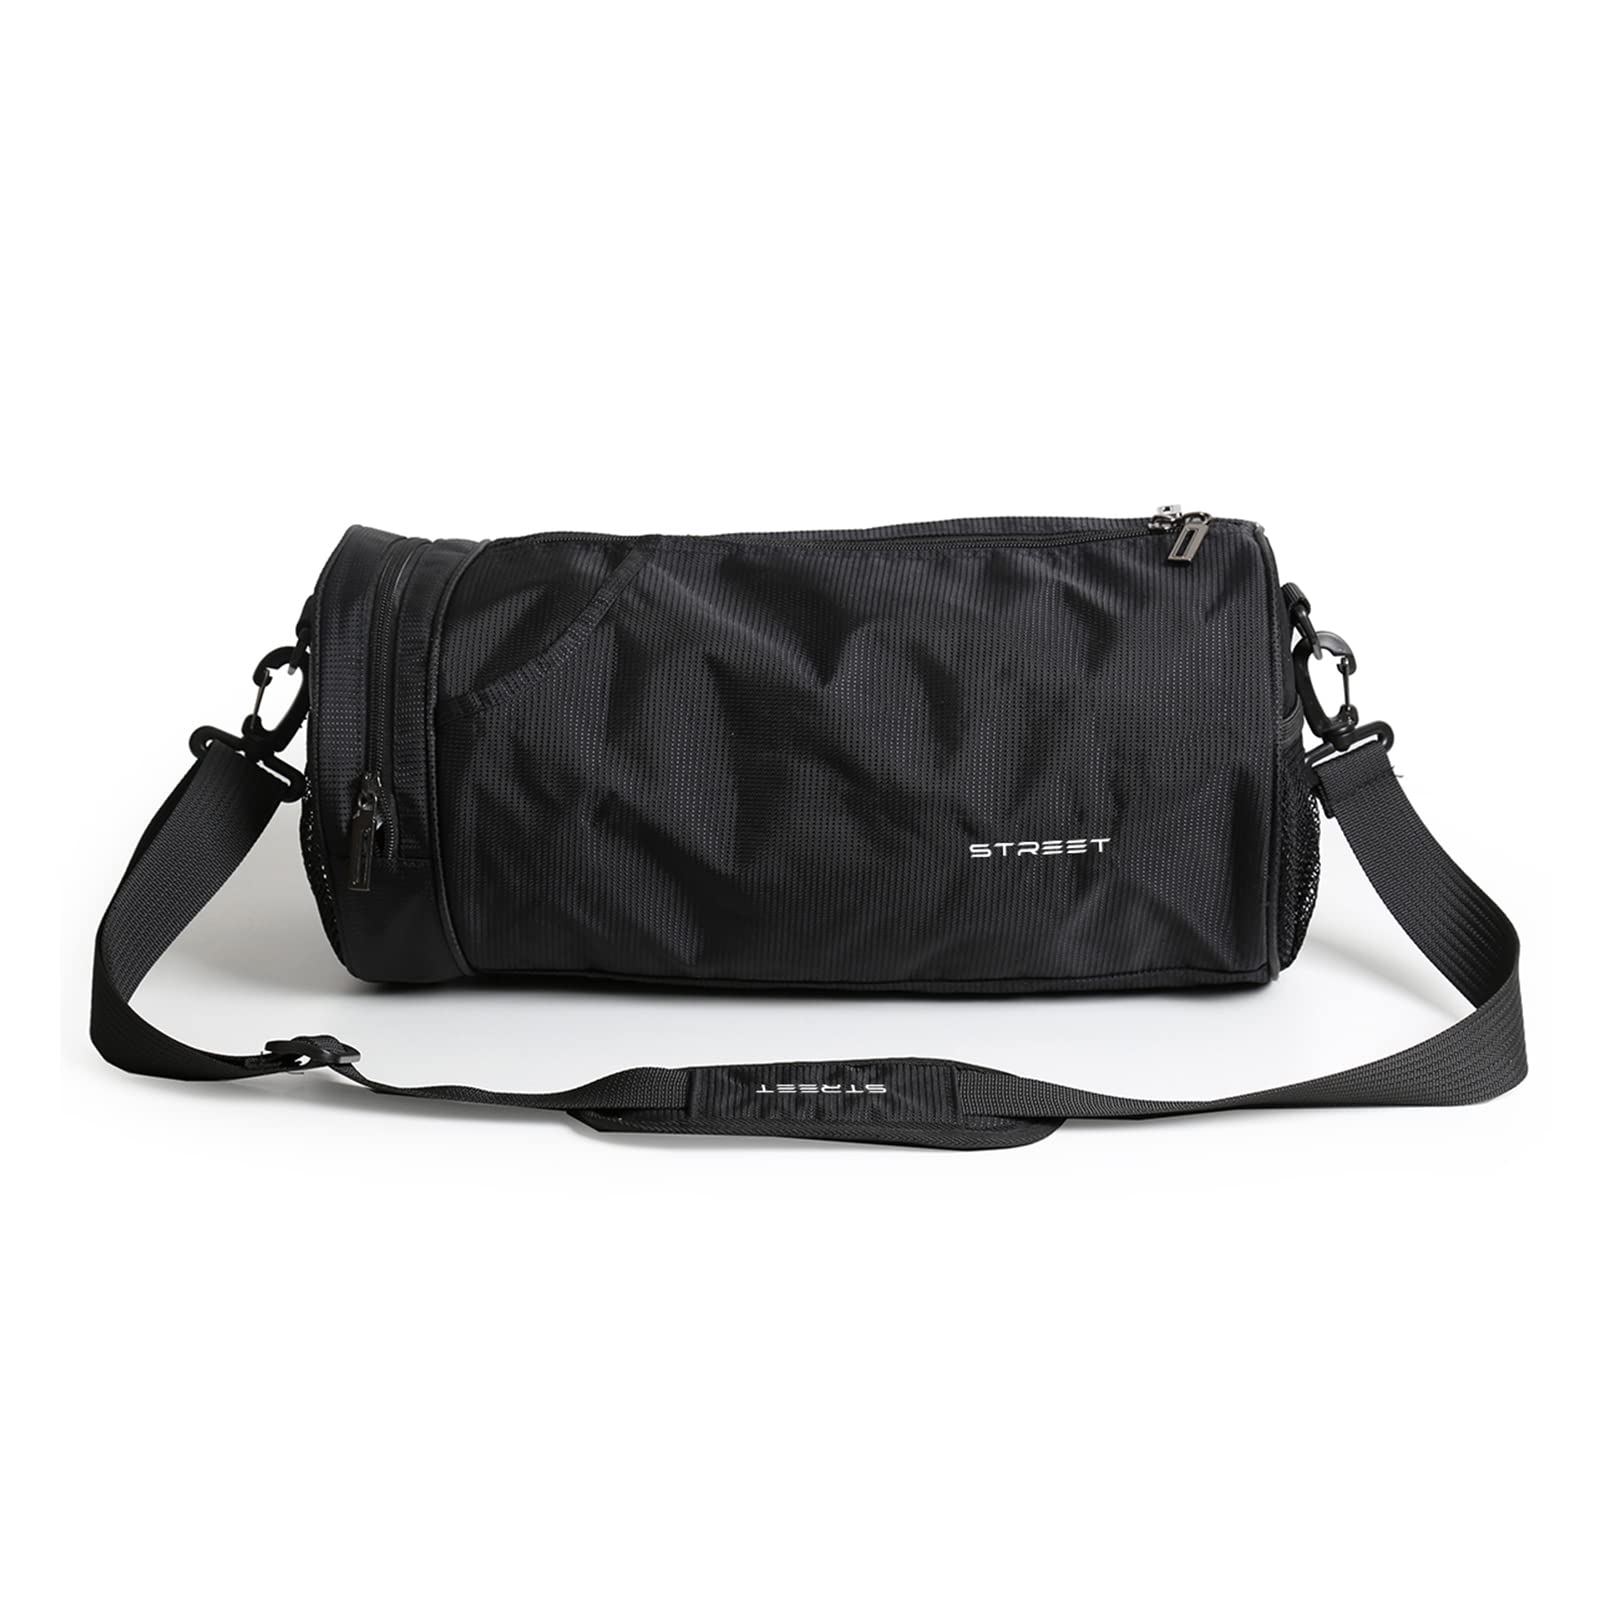 BRAND OF SIPSUN / Gym Bag Best Quality Of Product Grey & Braun Color Said  Pokit Lather